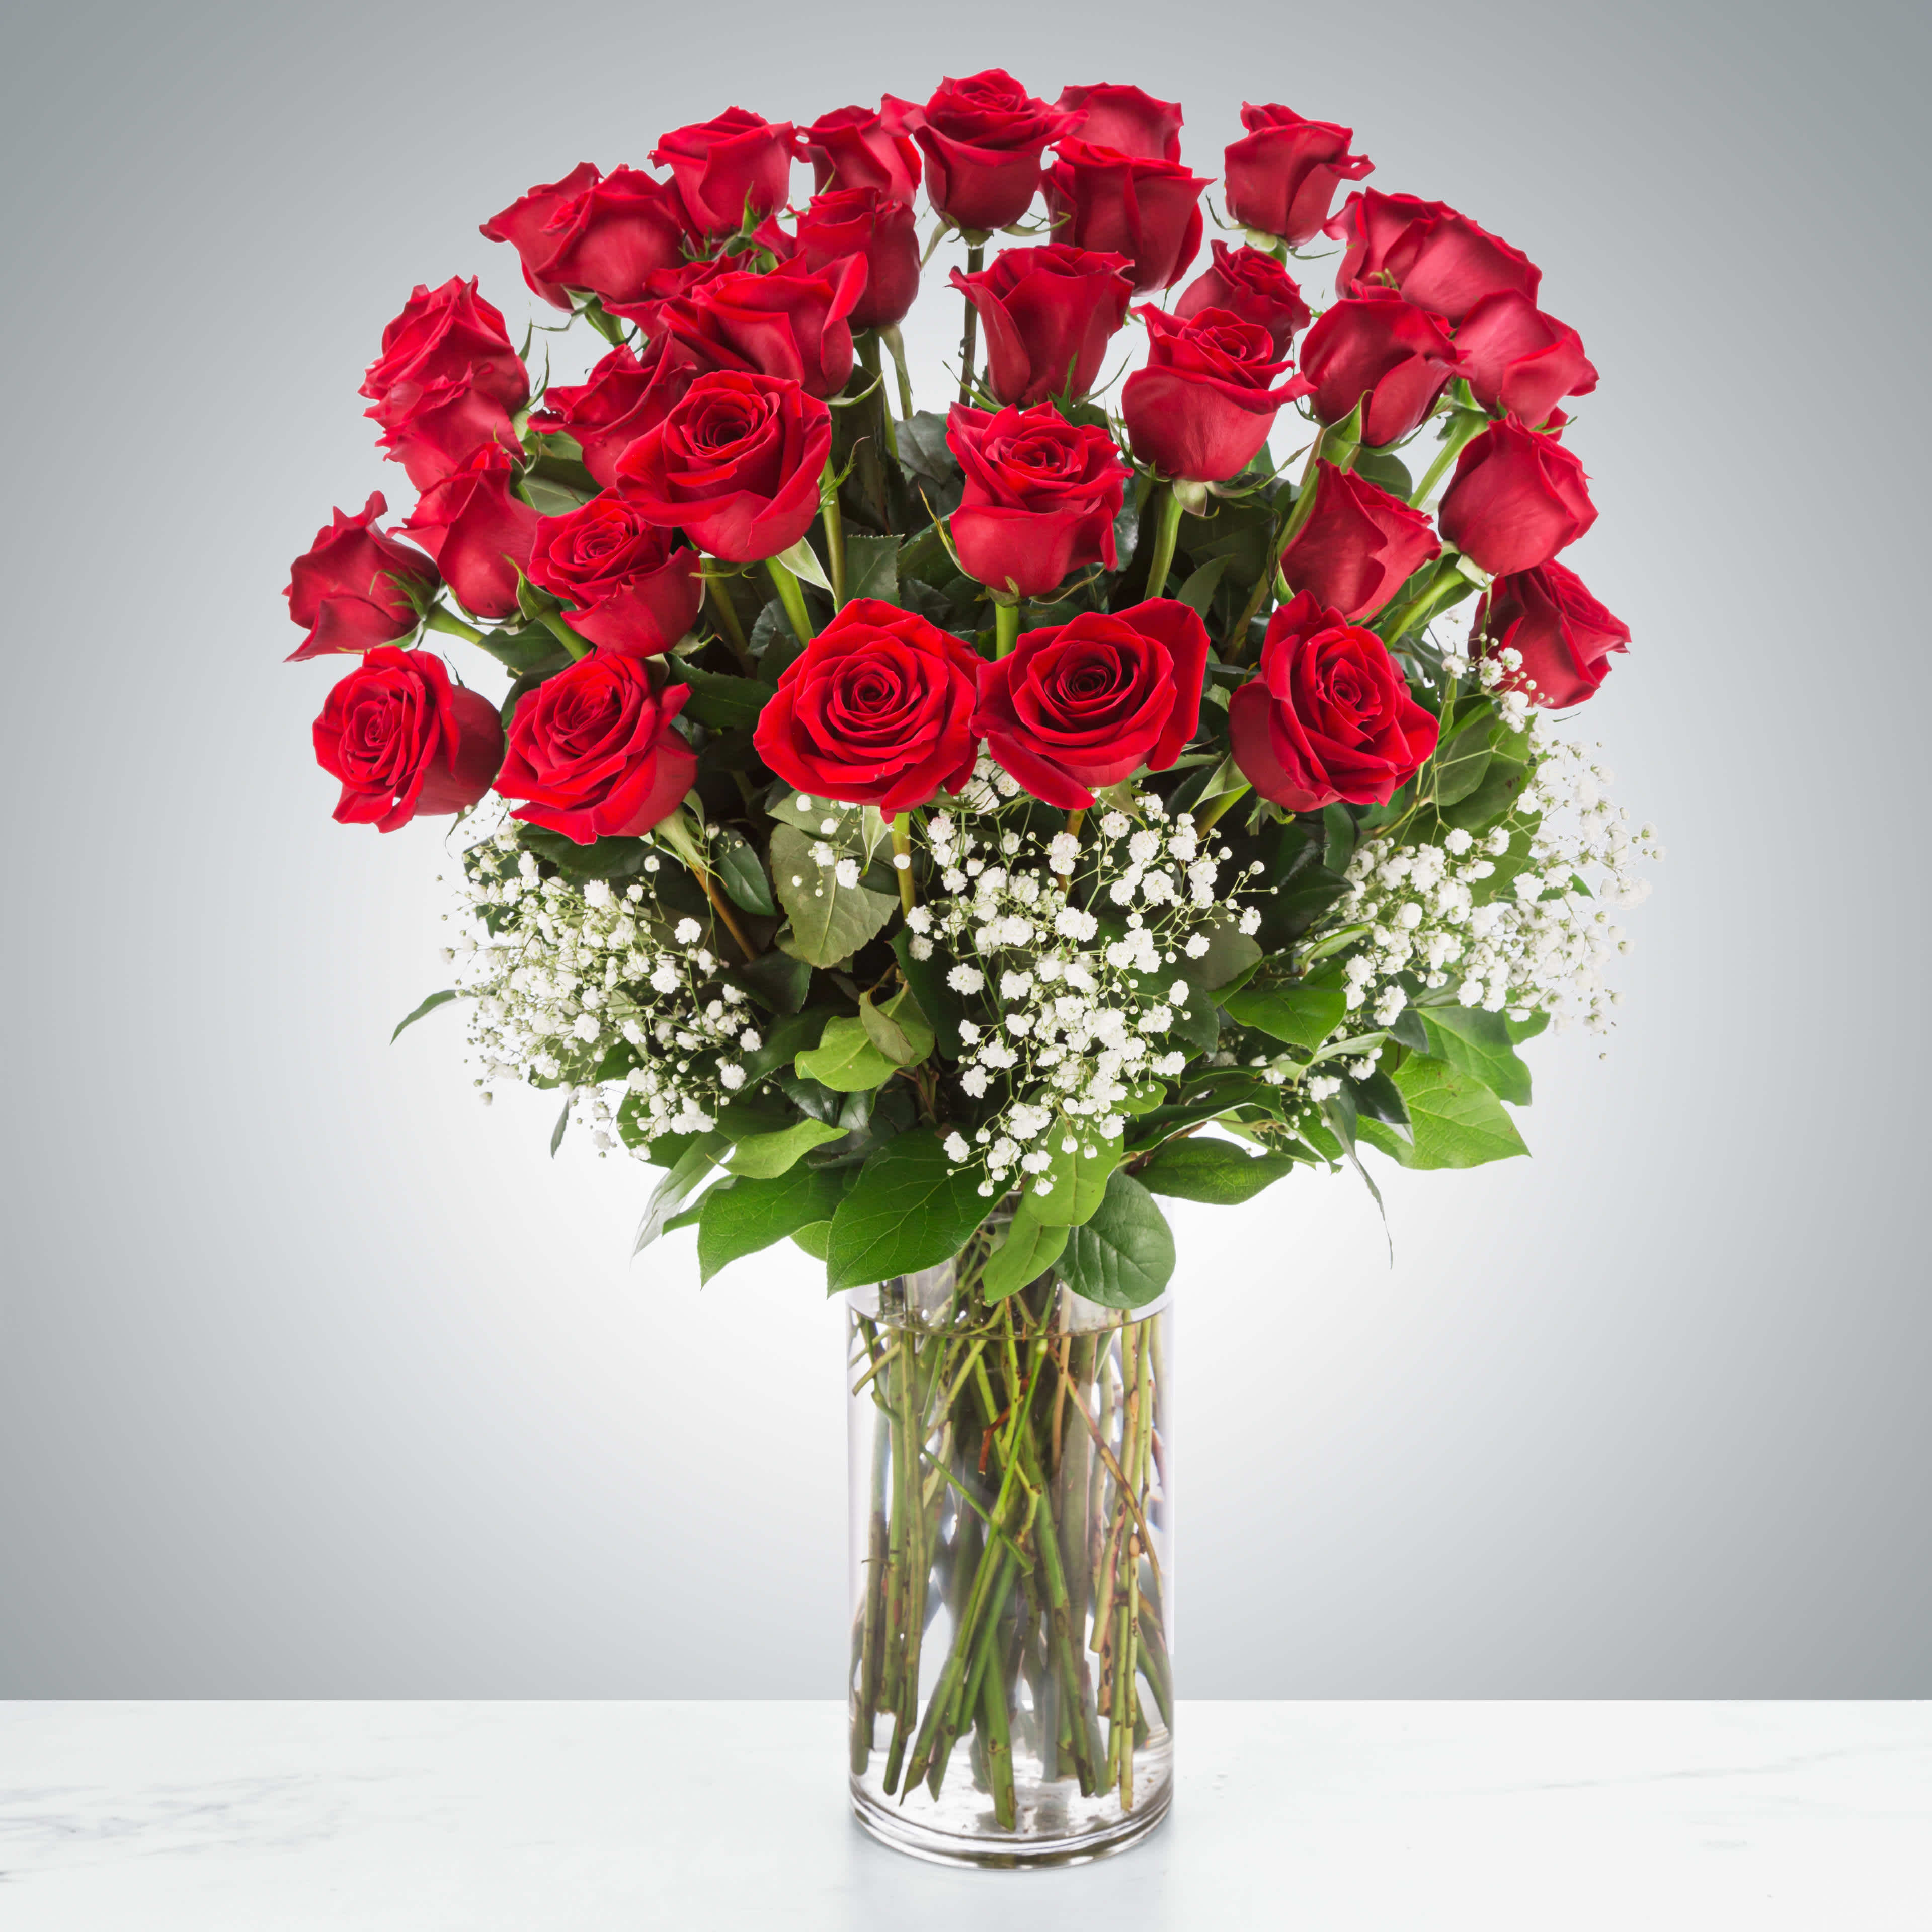 Grandeur Long Stem Rose Arrangement - Go big with your love. Send the most extravagant 3 dozen red rose arrangement for Valentine's day, anniversary celebrations, or declarations of love. This luxury arrangement makes a big statement of &quot;I love you&quot; in 36 roses.  Approximate Dimensions: 20&quot;D x 32&quot;H